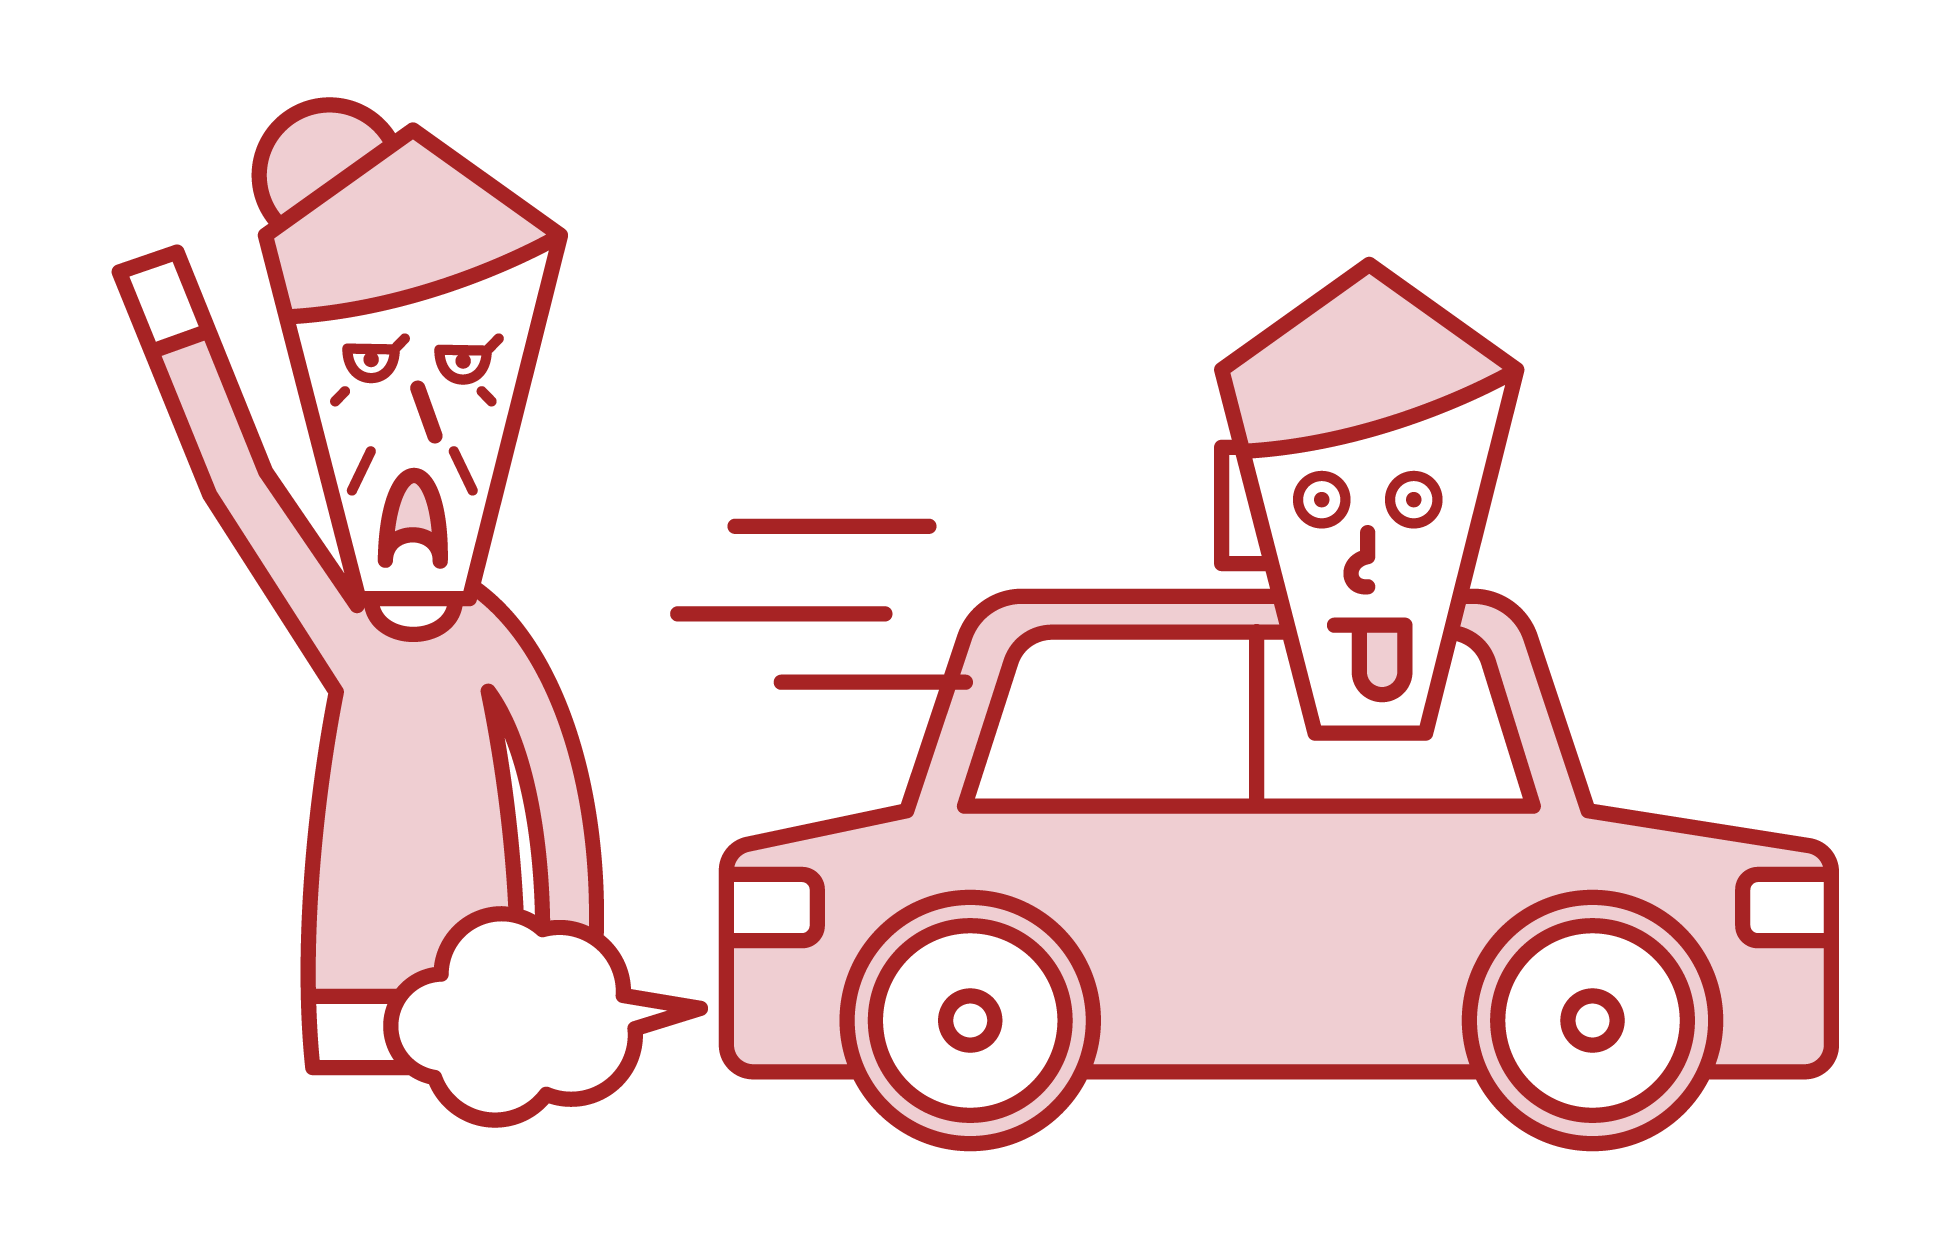 Illustration of a person (grandmother) who failed to catch a taxi